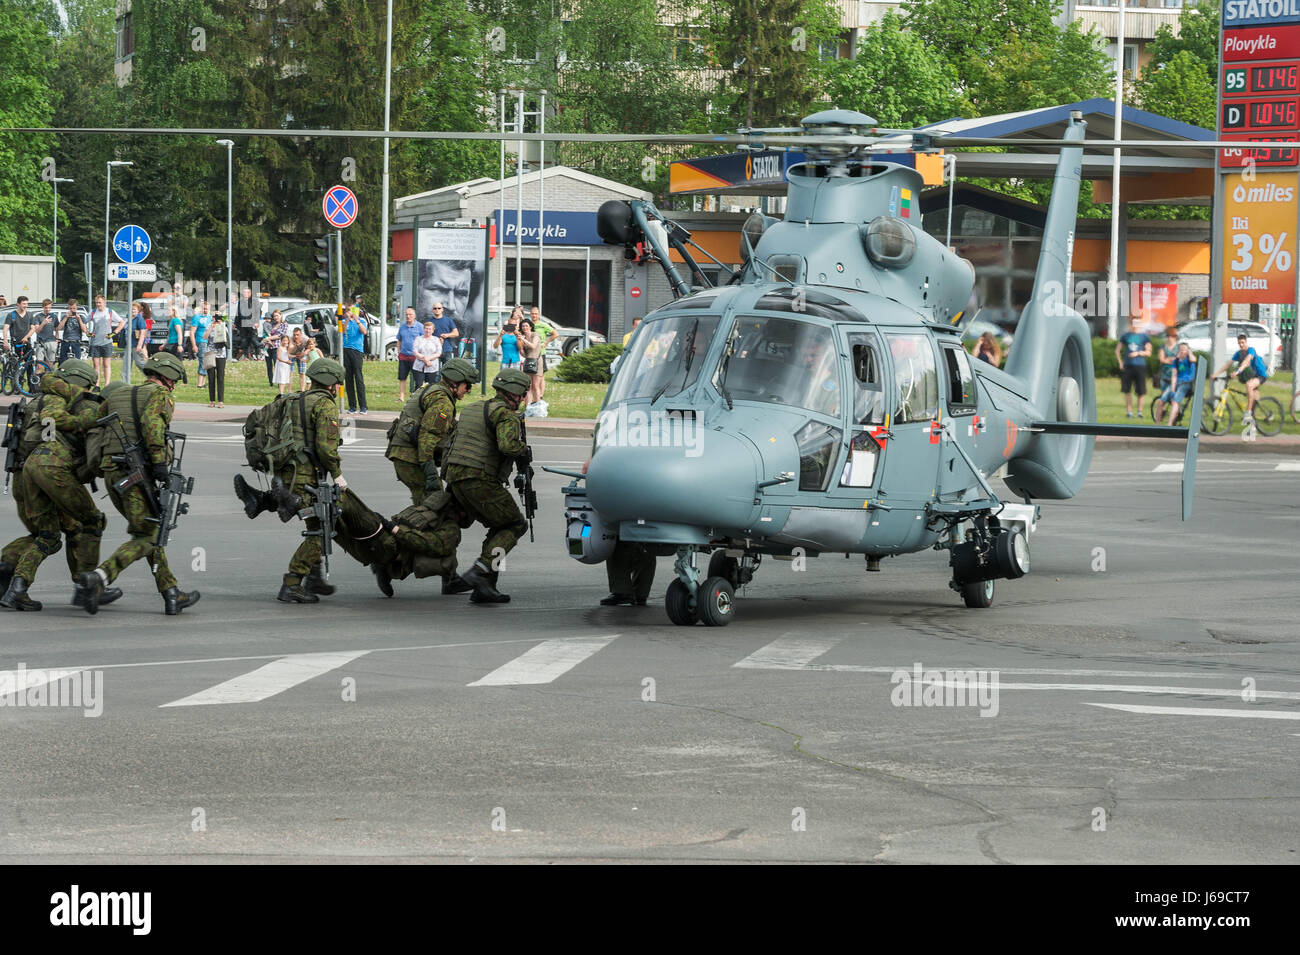 Vilnius, Lithuania. 20th May, 2017. Soldiers show the public how to carry the wounded to the helicopter in Panevezys, northern city of Lithuania, May 20, 2017. Lithuania celebrated Armed Forces and Public Unity Day in northern city of Panevezys on Saturday. Credit: Alfredas Pliadis/Xinhua/Alamy Live News Stock Photo